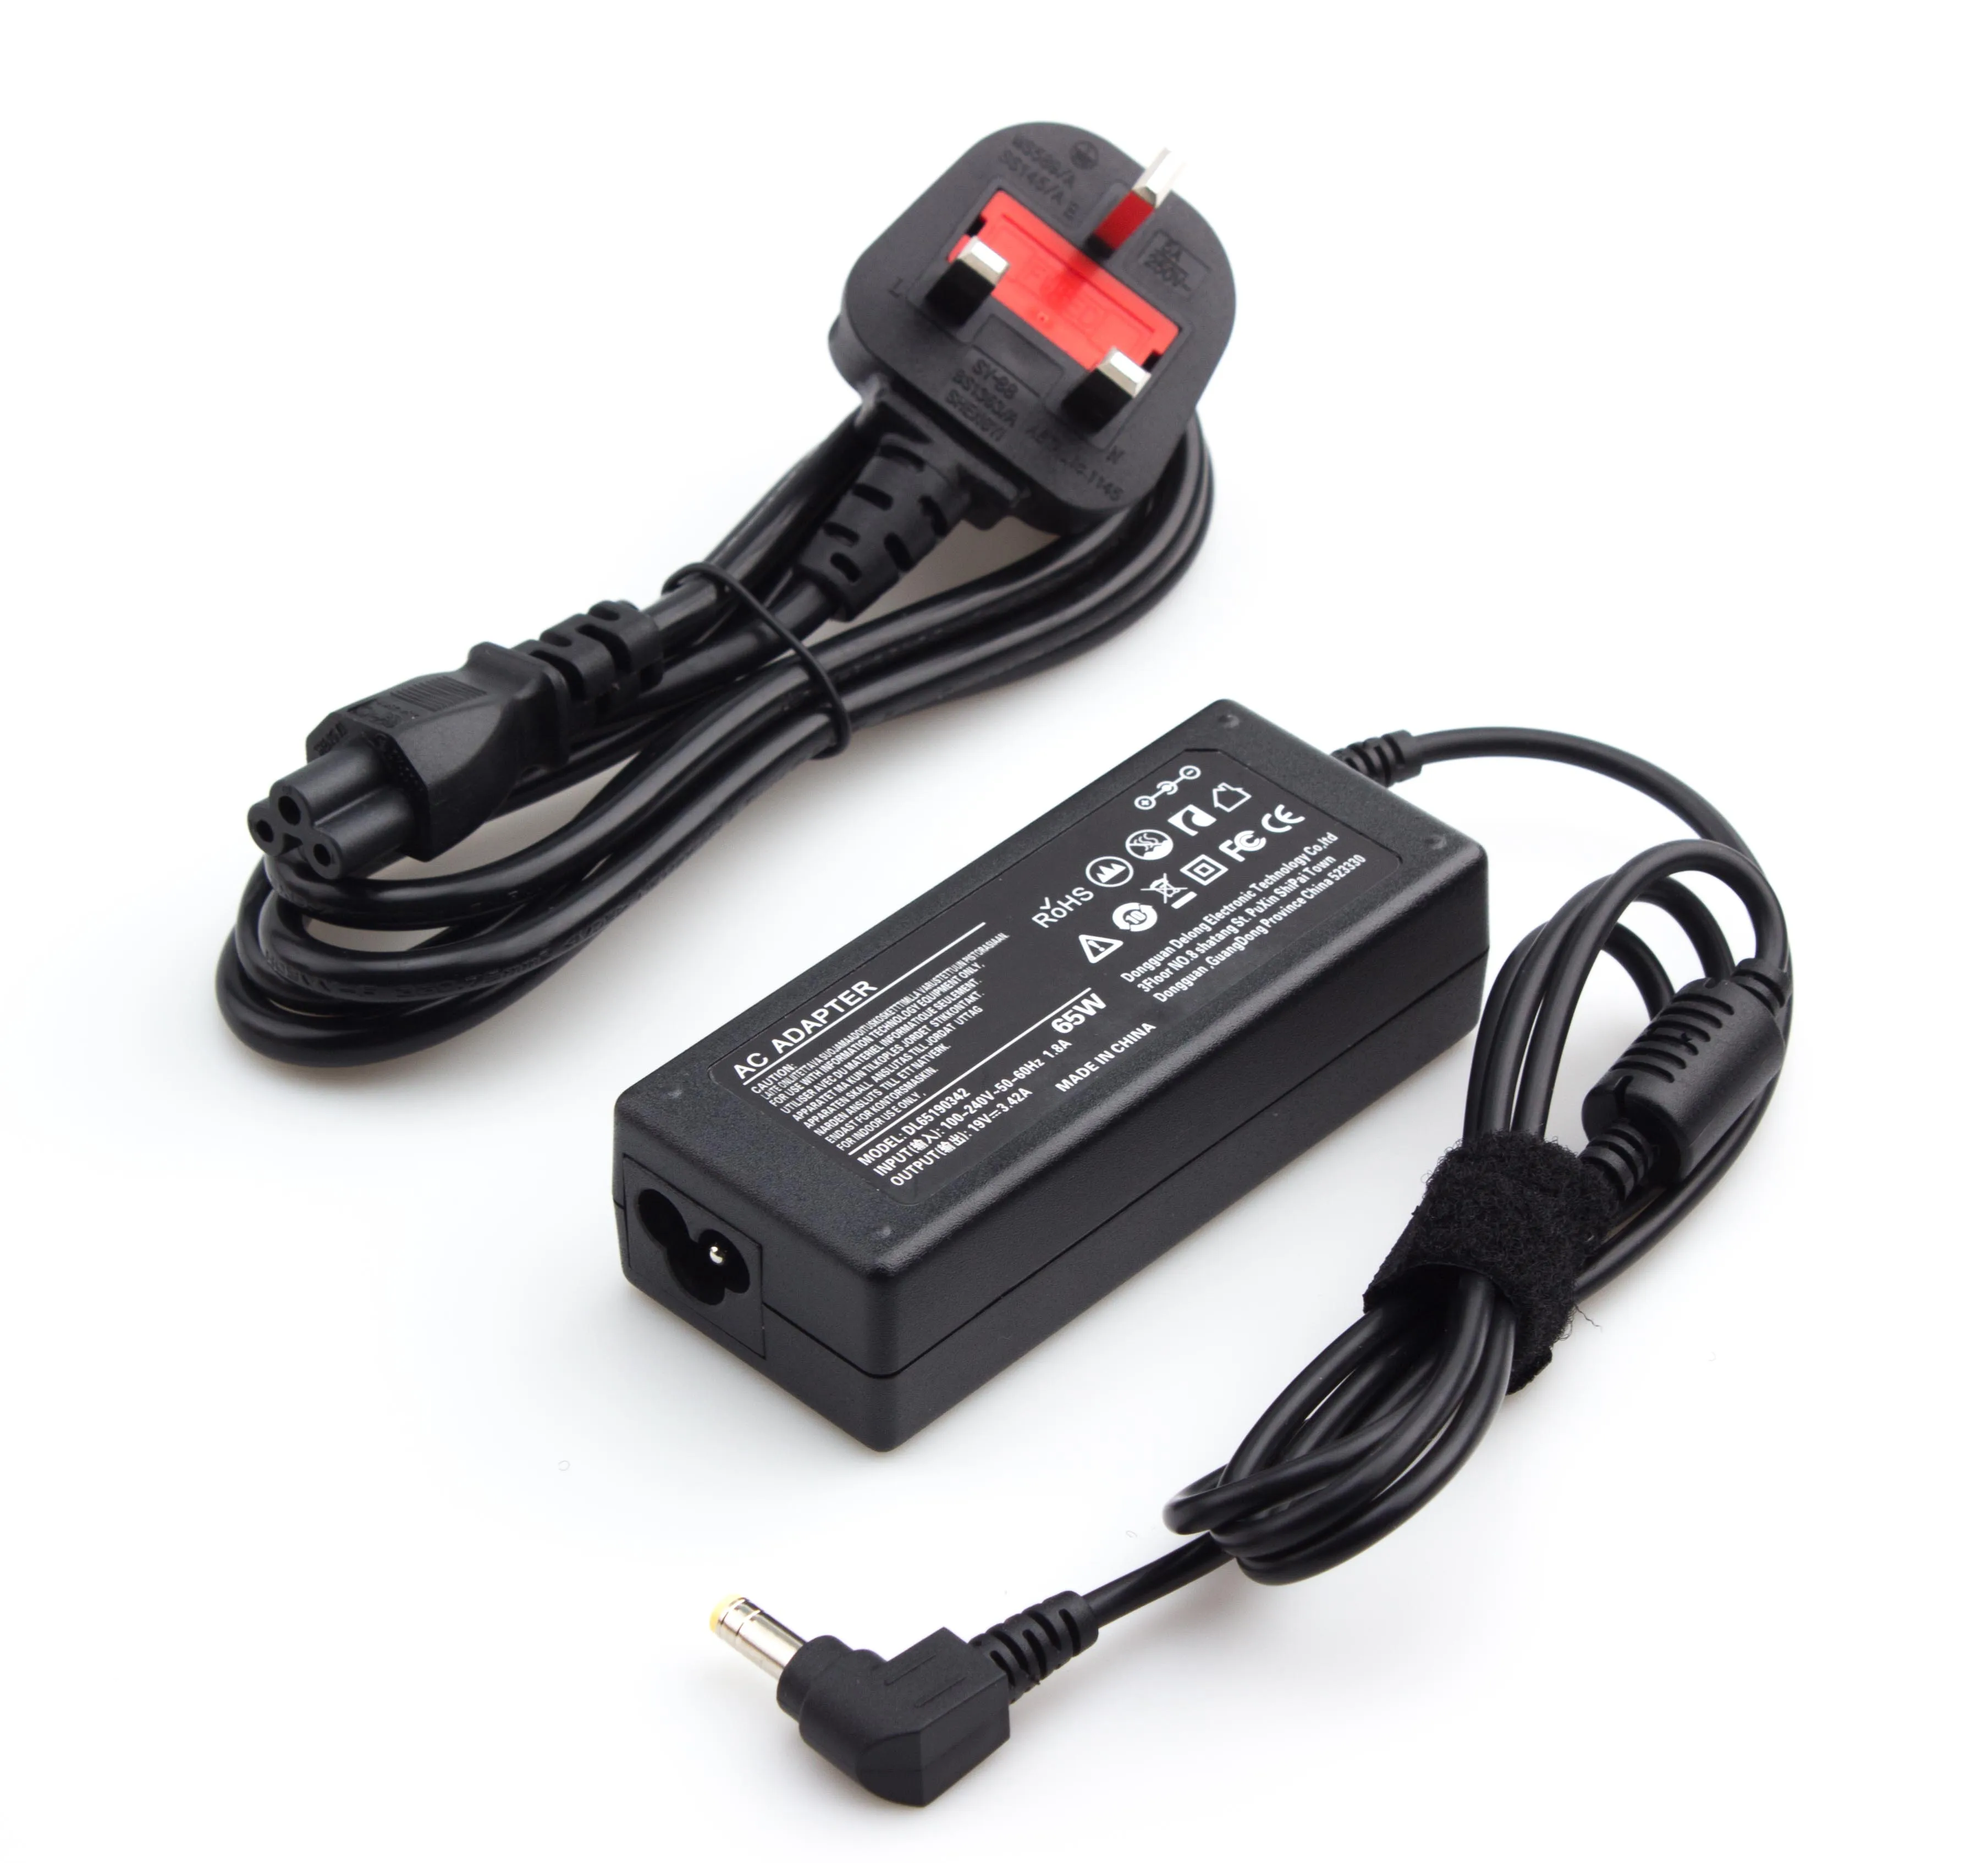 Intens Luiheid vitamine 19v 3.42a Ac Adapter Oplader 65w Voedingskabel Voor J B L Xtreme Oplader  Nsa60ed-190300 Ads-60jia-19-2 Dt19v-3c-dc - Buy Xtreme 2 Charger,Boost Tv  Soundbar Charger,Boombox Charger Product on Alibaba.com